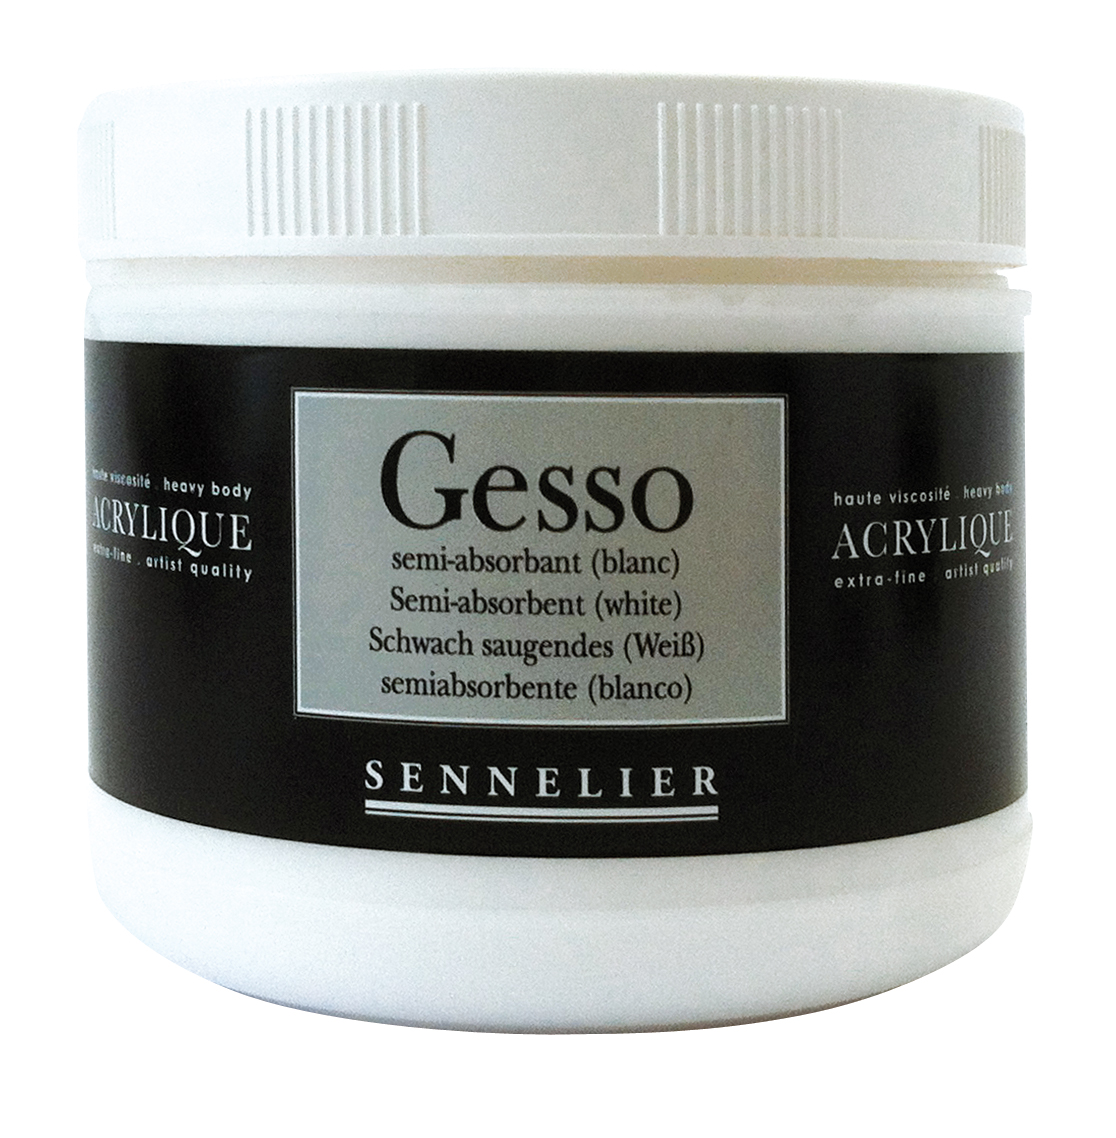 Semi-absorbent gesso (white)